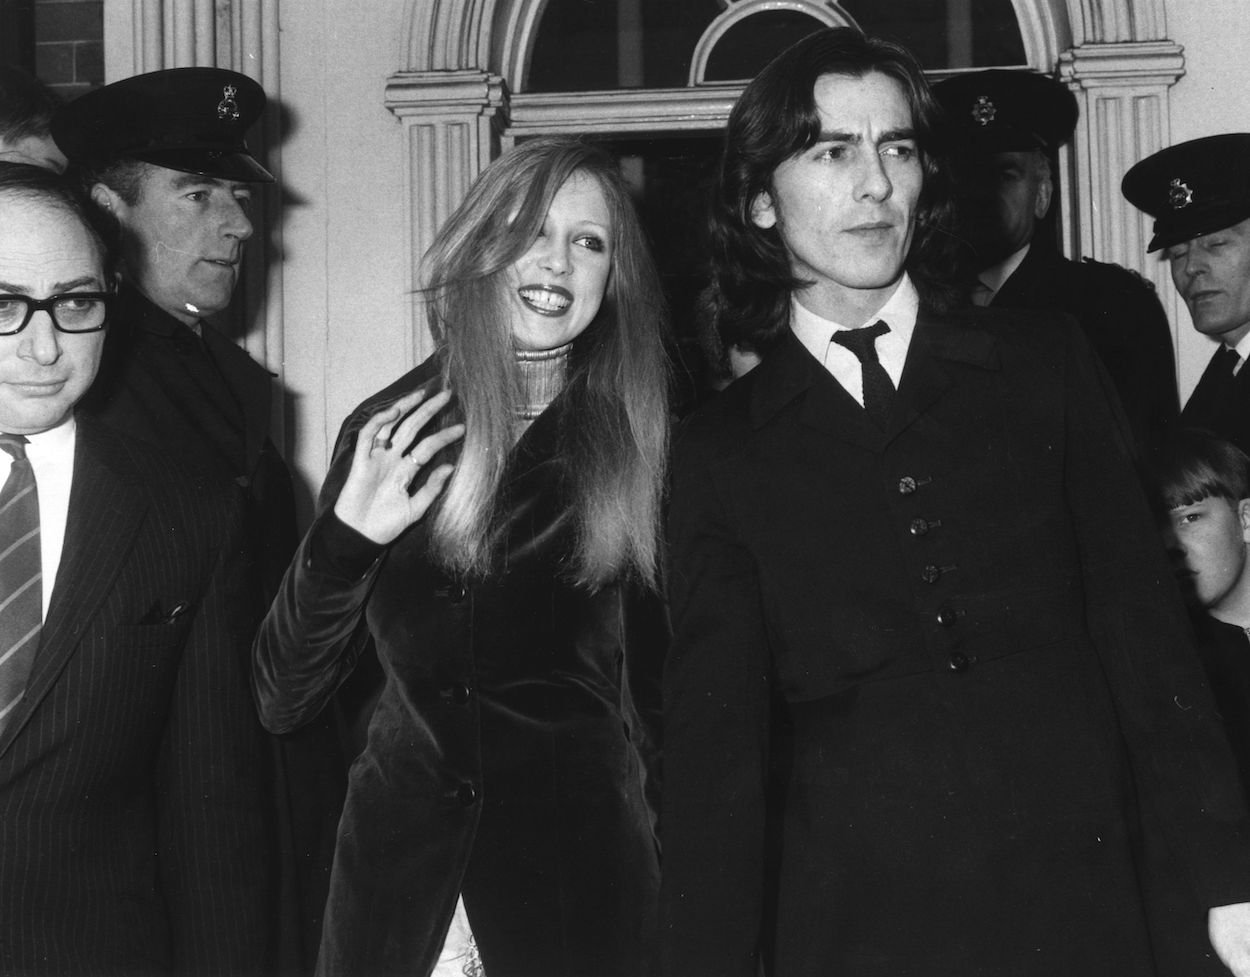 George Harrison Went Into a Shell After 1 Beatles Fight, According to Pattie Boyd: ‘I Couldn’t Reach Him’